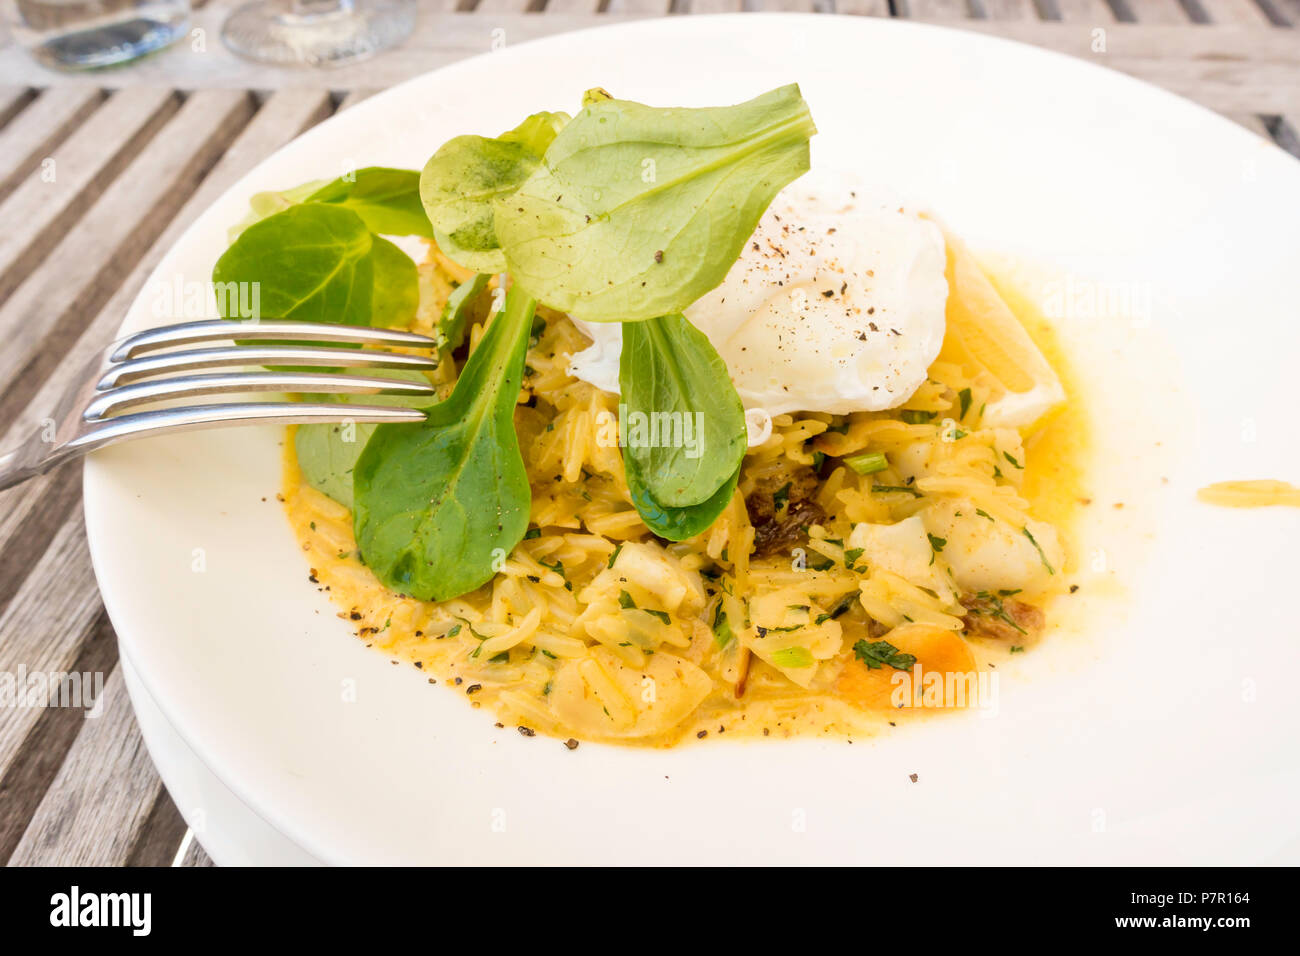 Kedgeree a breakfast dish that originated in India curried rice smoked haddock egg raisins with a poached egg on top Stock Photo